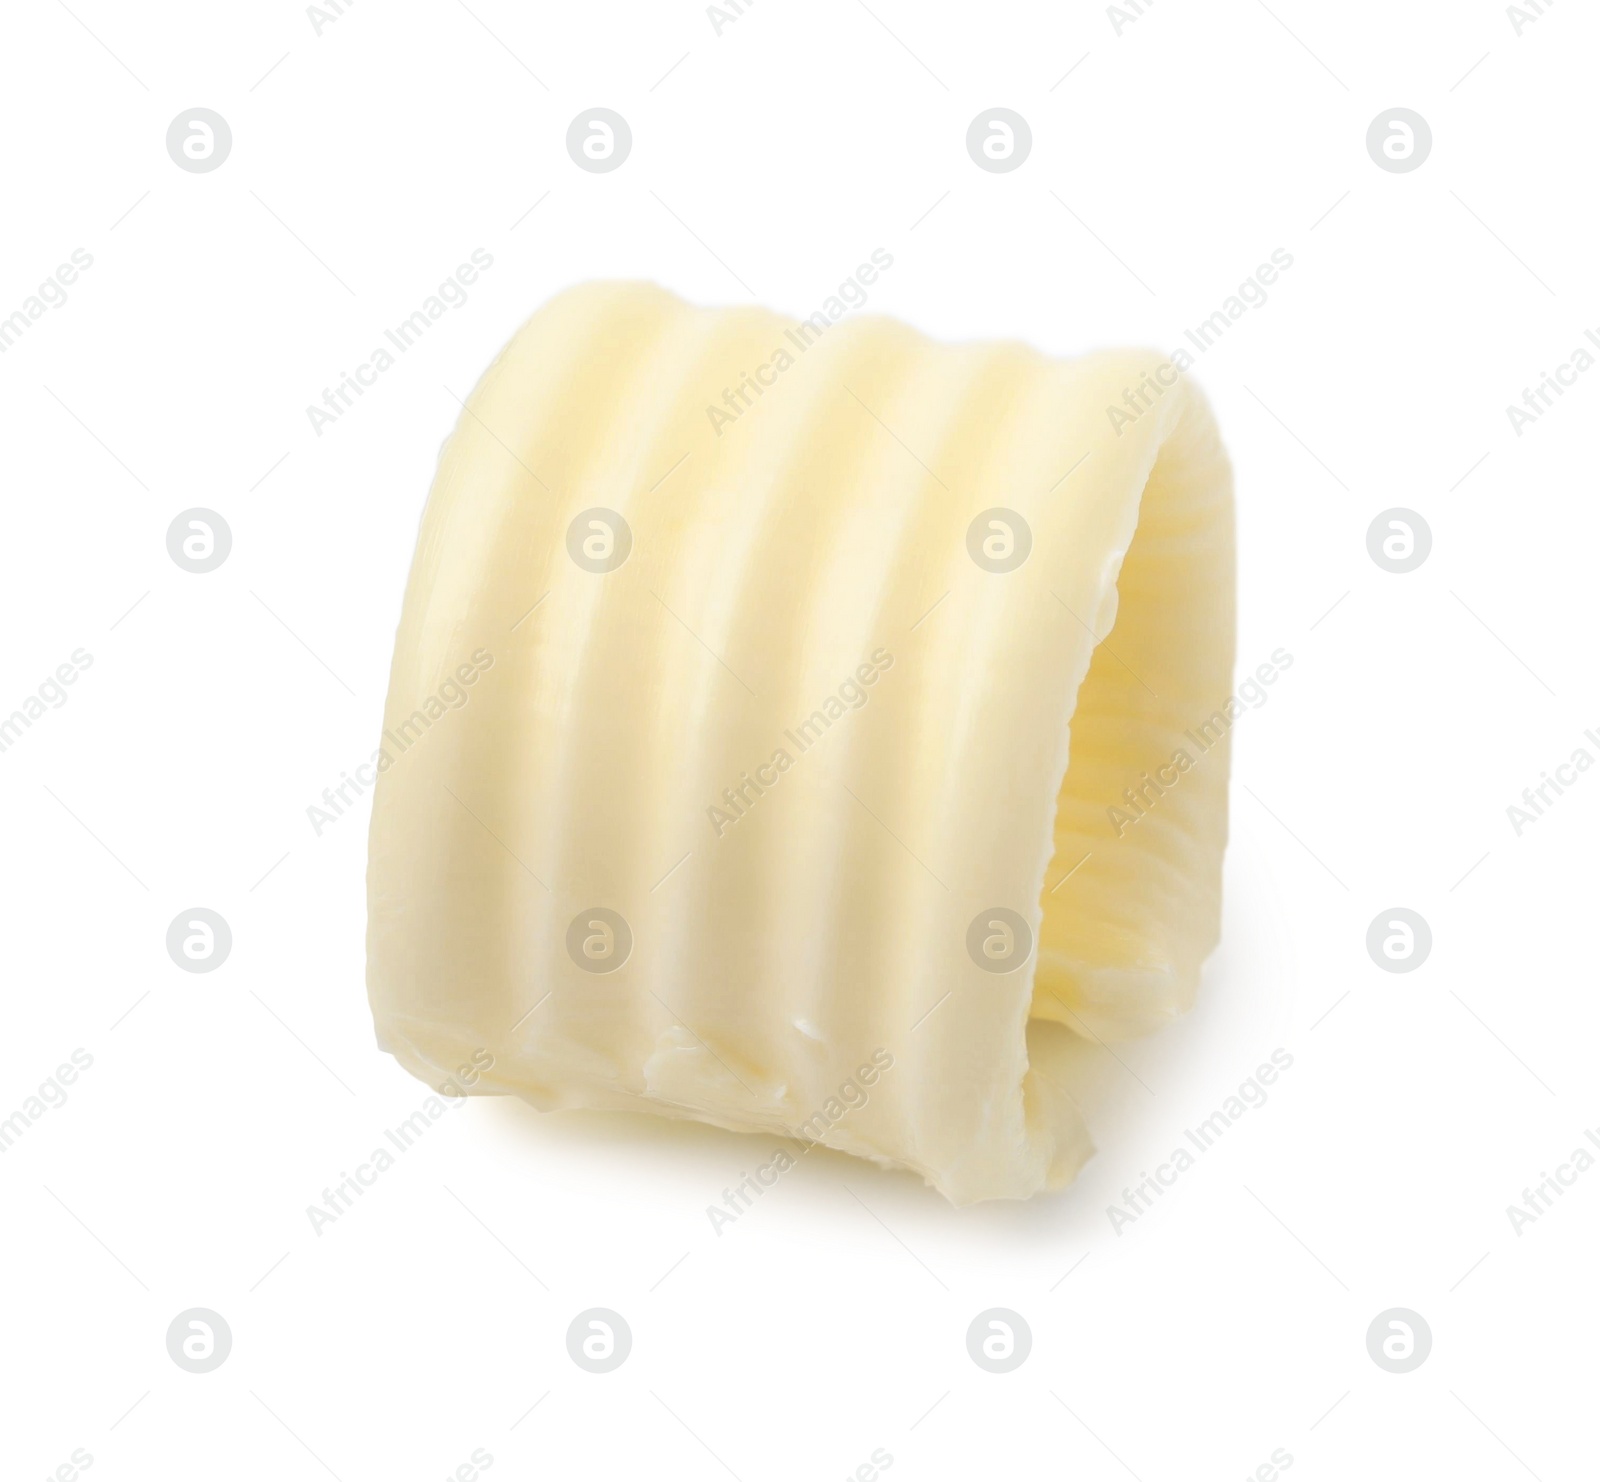 Photo of One tasty butter curl isolated on white